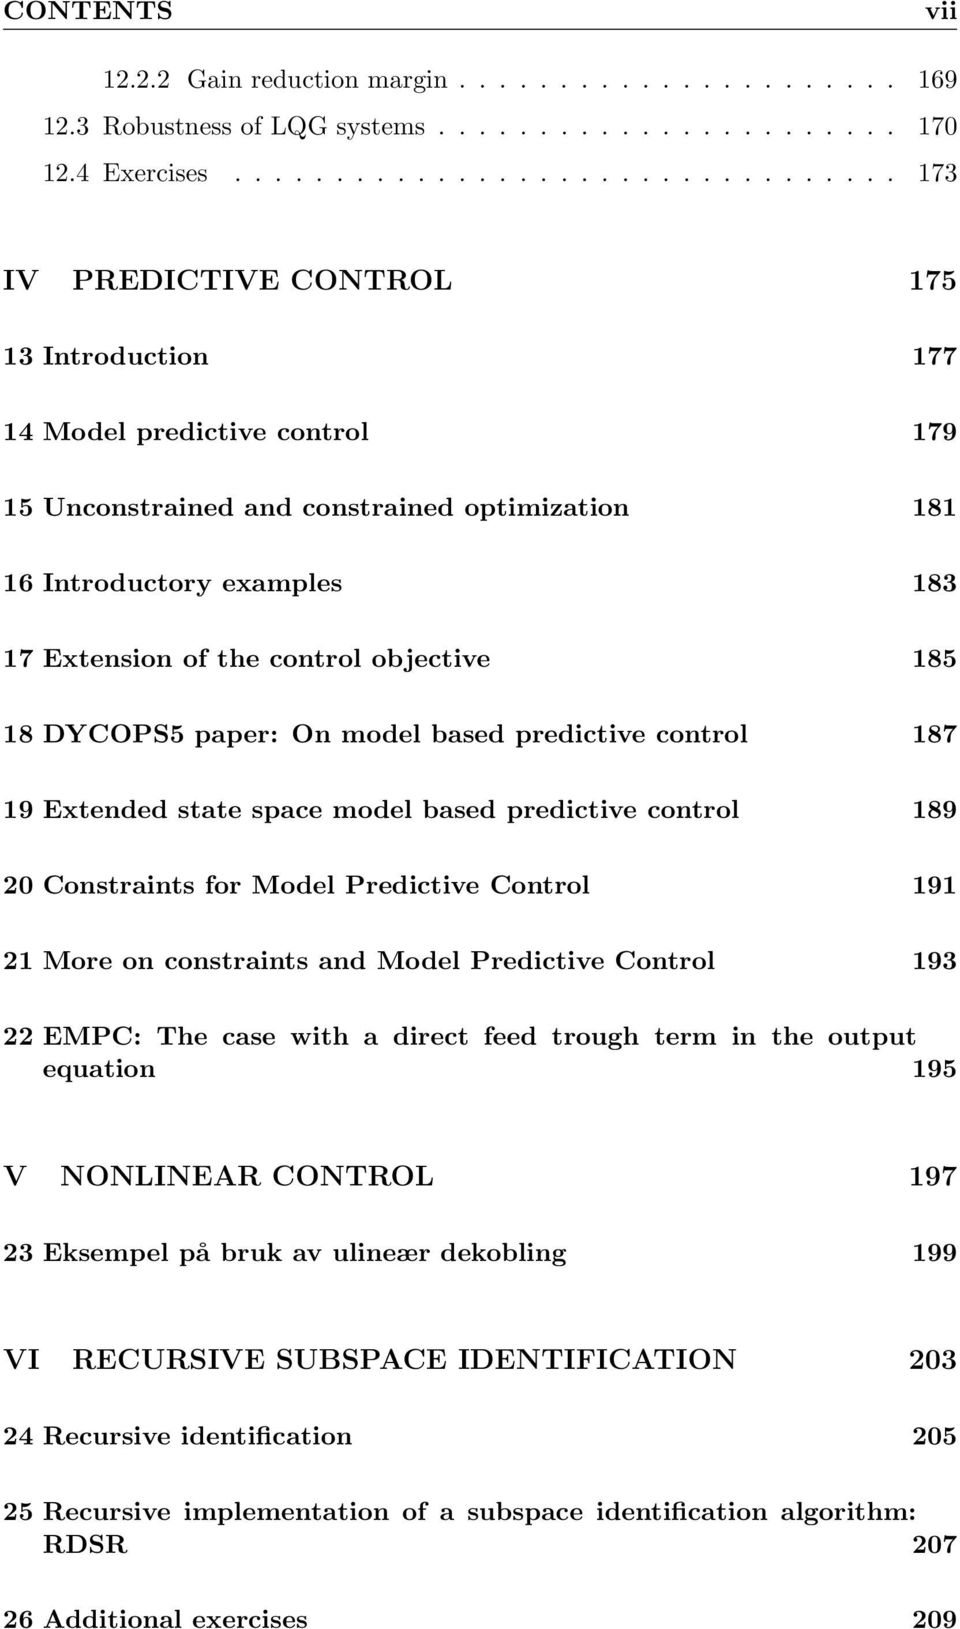 Extension of the control objective 185 18 DYCOPS5 paper: On model based predictive control 187 19 Extended state space model based predictive control 189 20 Constraints for Model Predictive Control